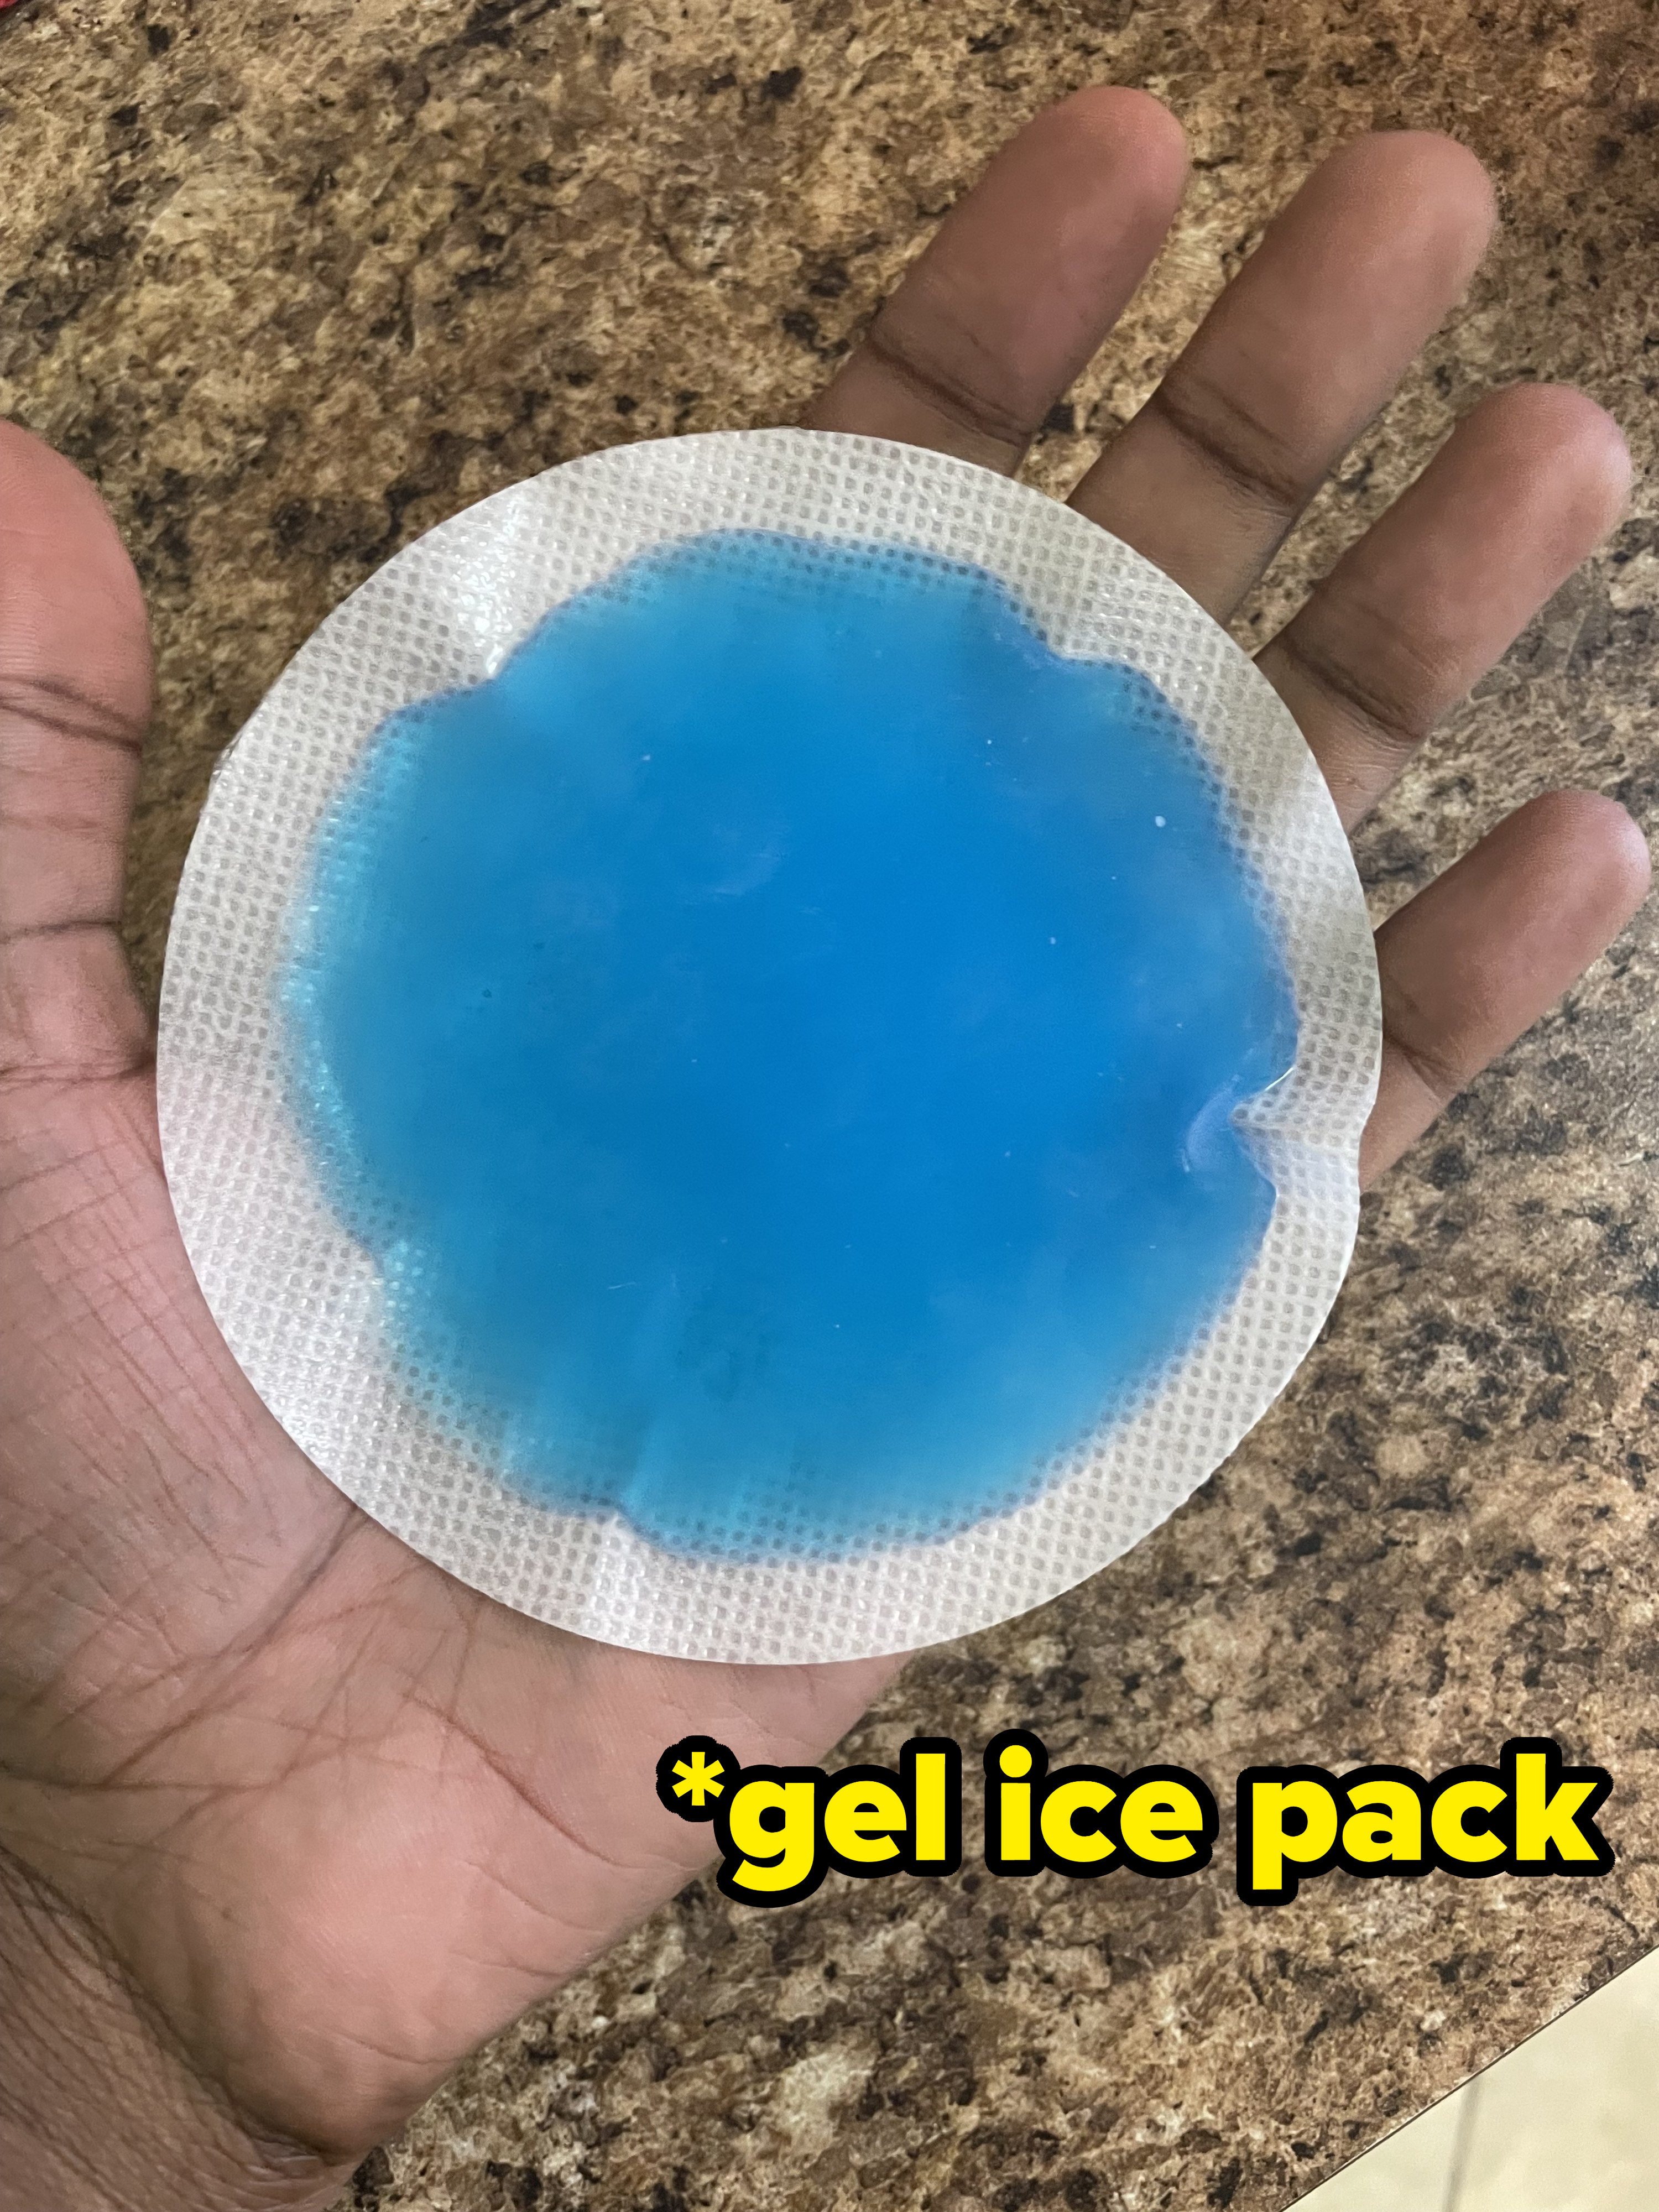 A photo of a gel ice pack in my hand